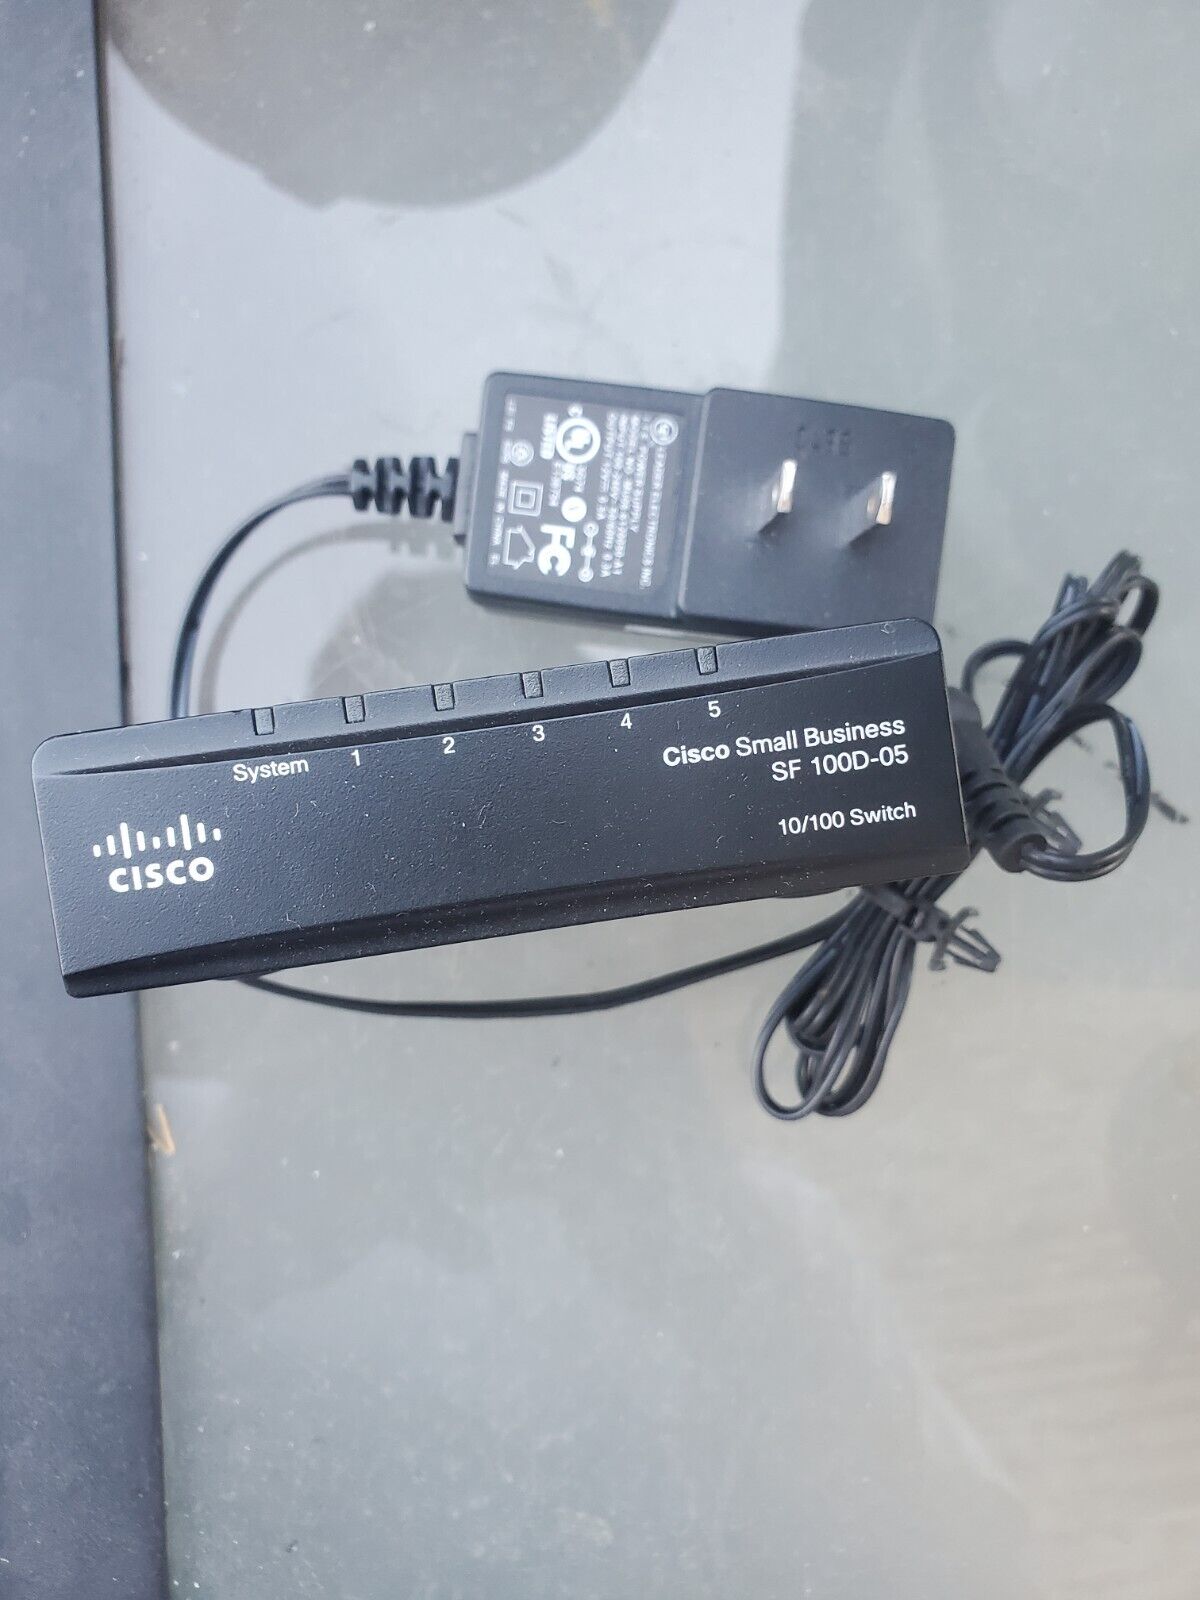 Cisco SF100D-05 v2 5-Port 10/100 Small Business Switch W/ADAPTER FREE S/H